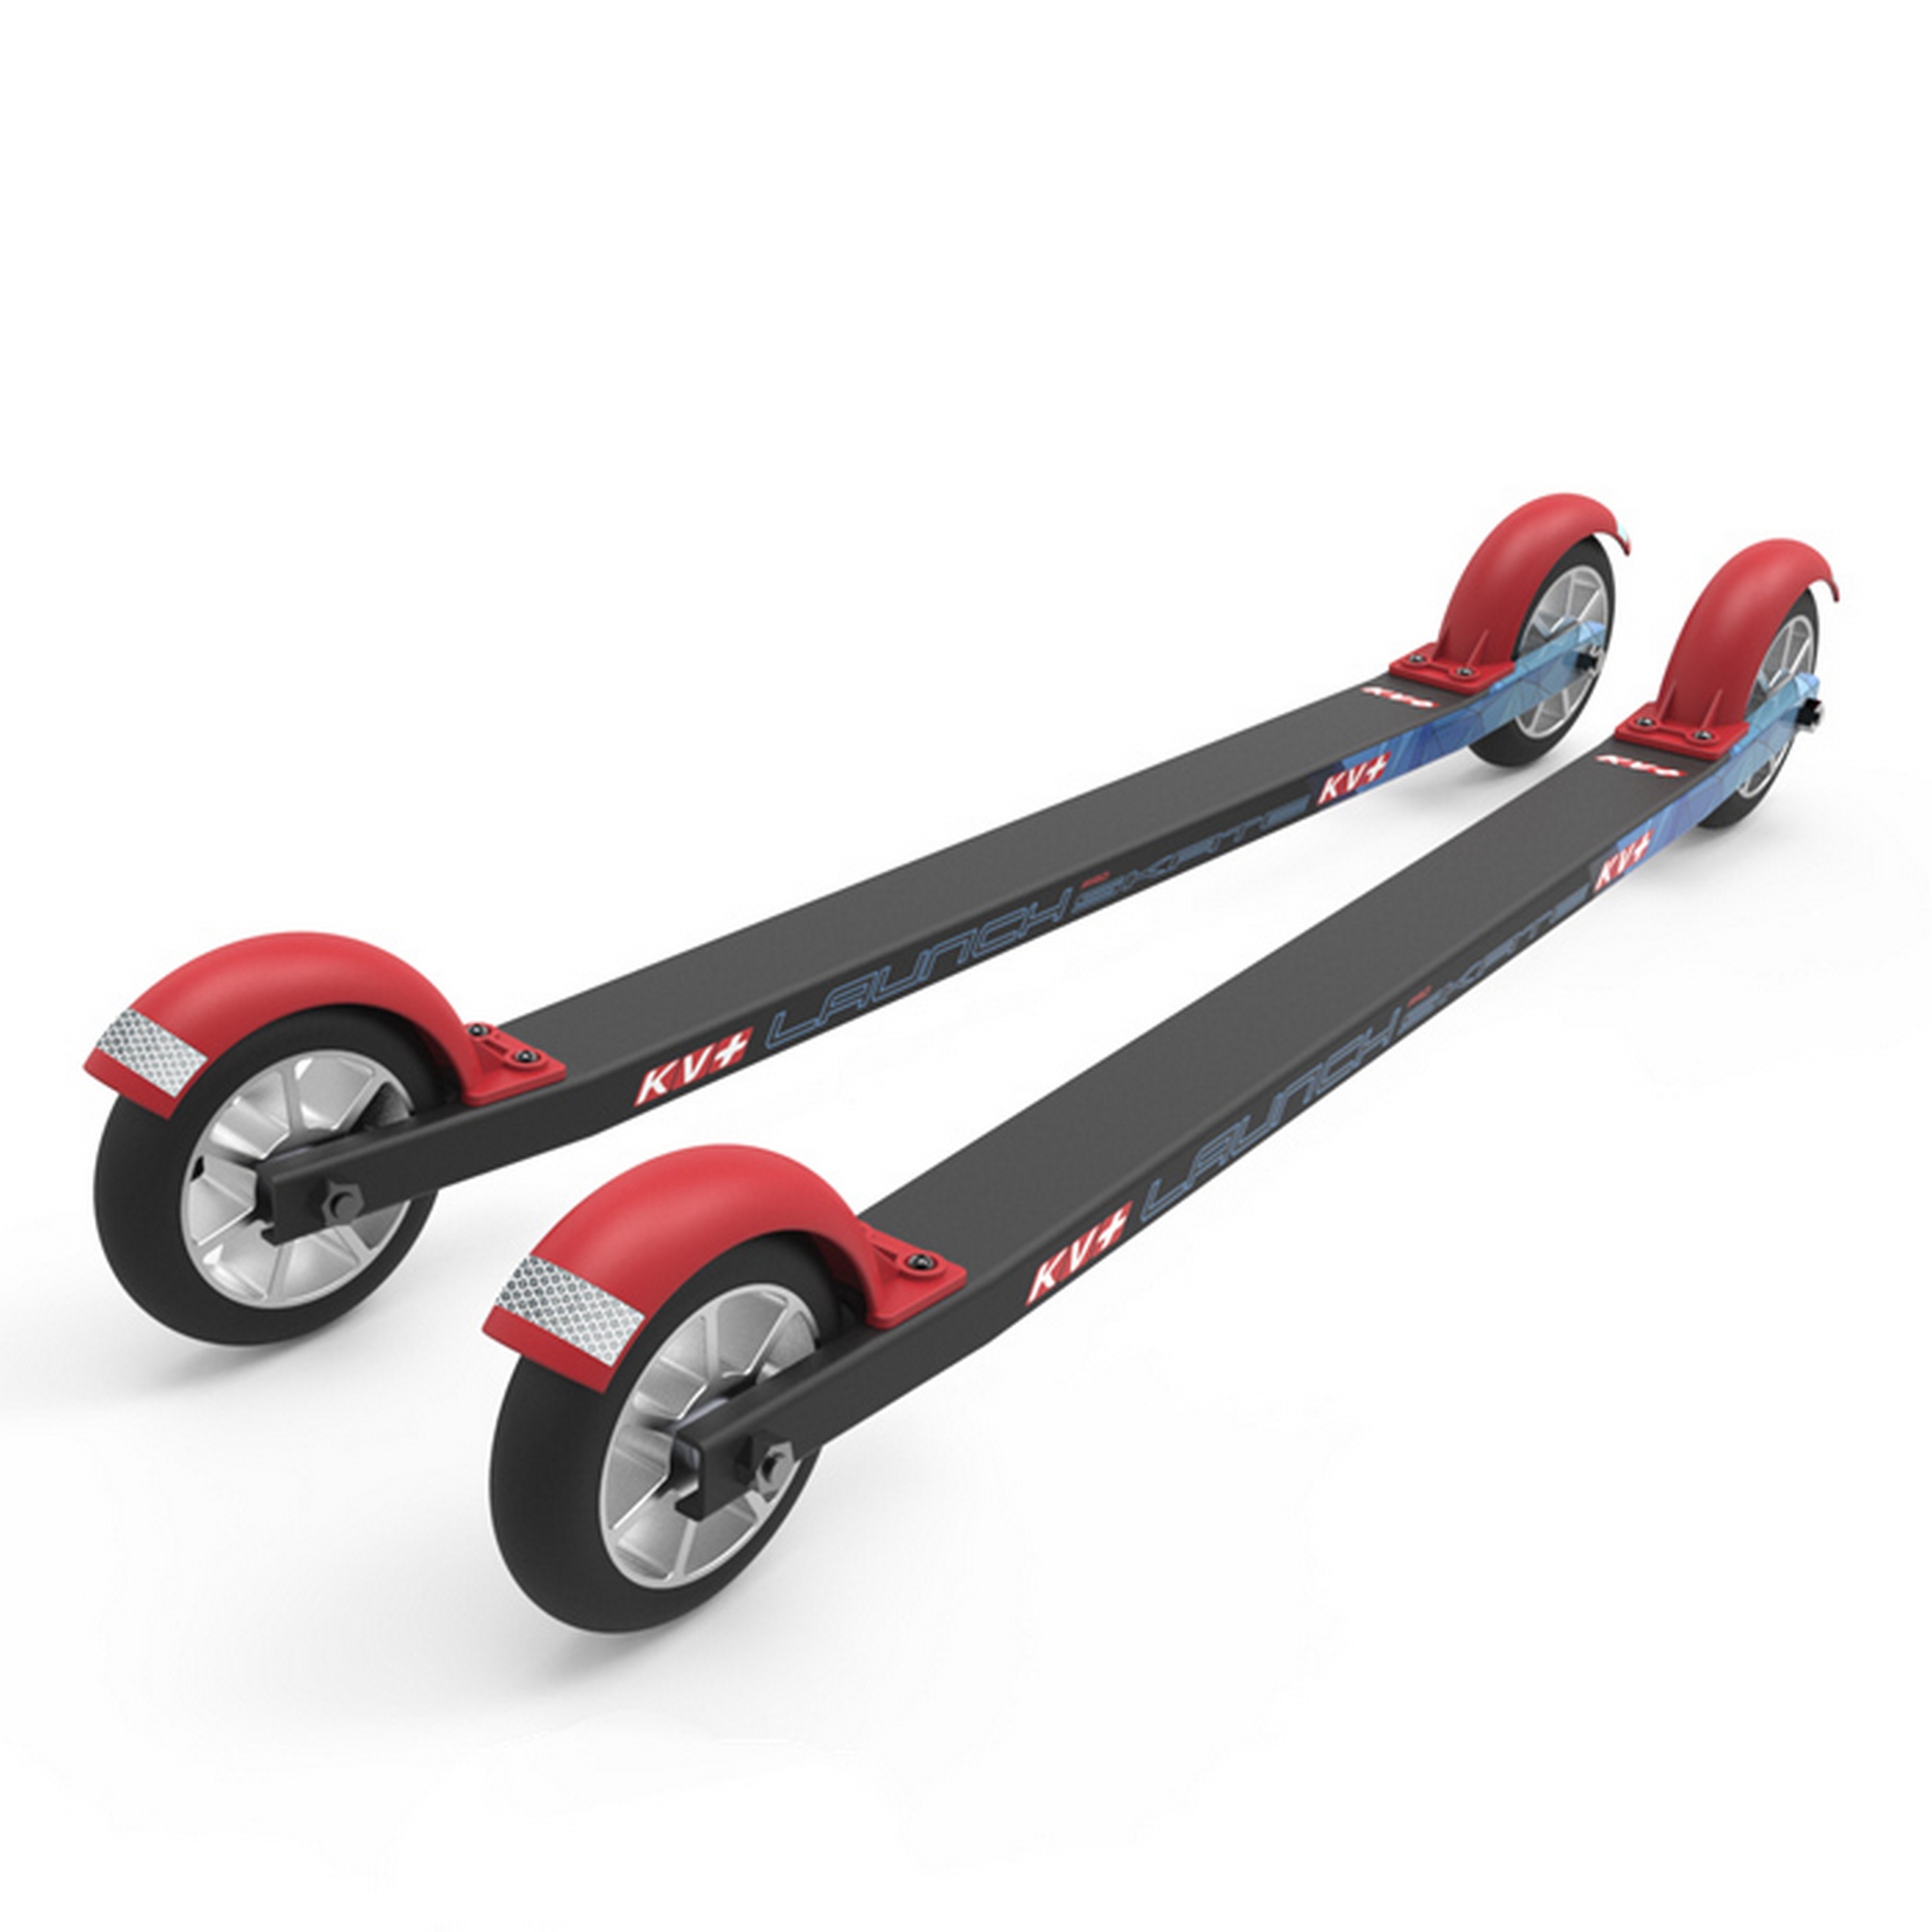  KV+  Launch Pro Skate Curved 60 (Slow Wheels) 21RS02.S 